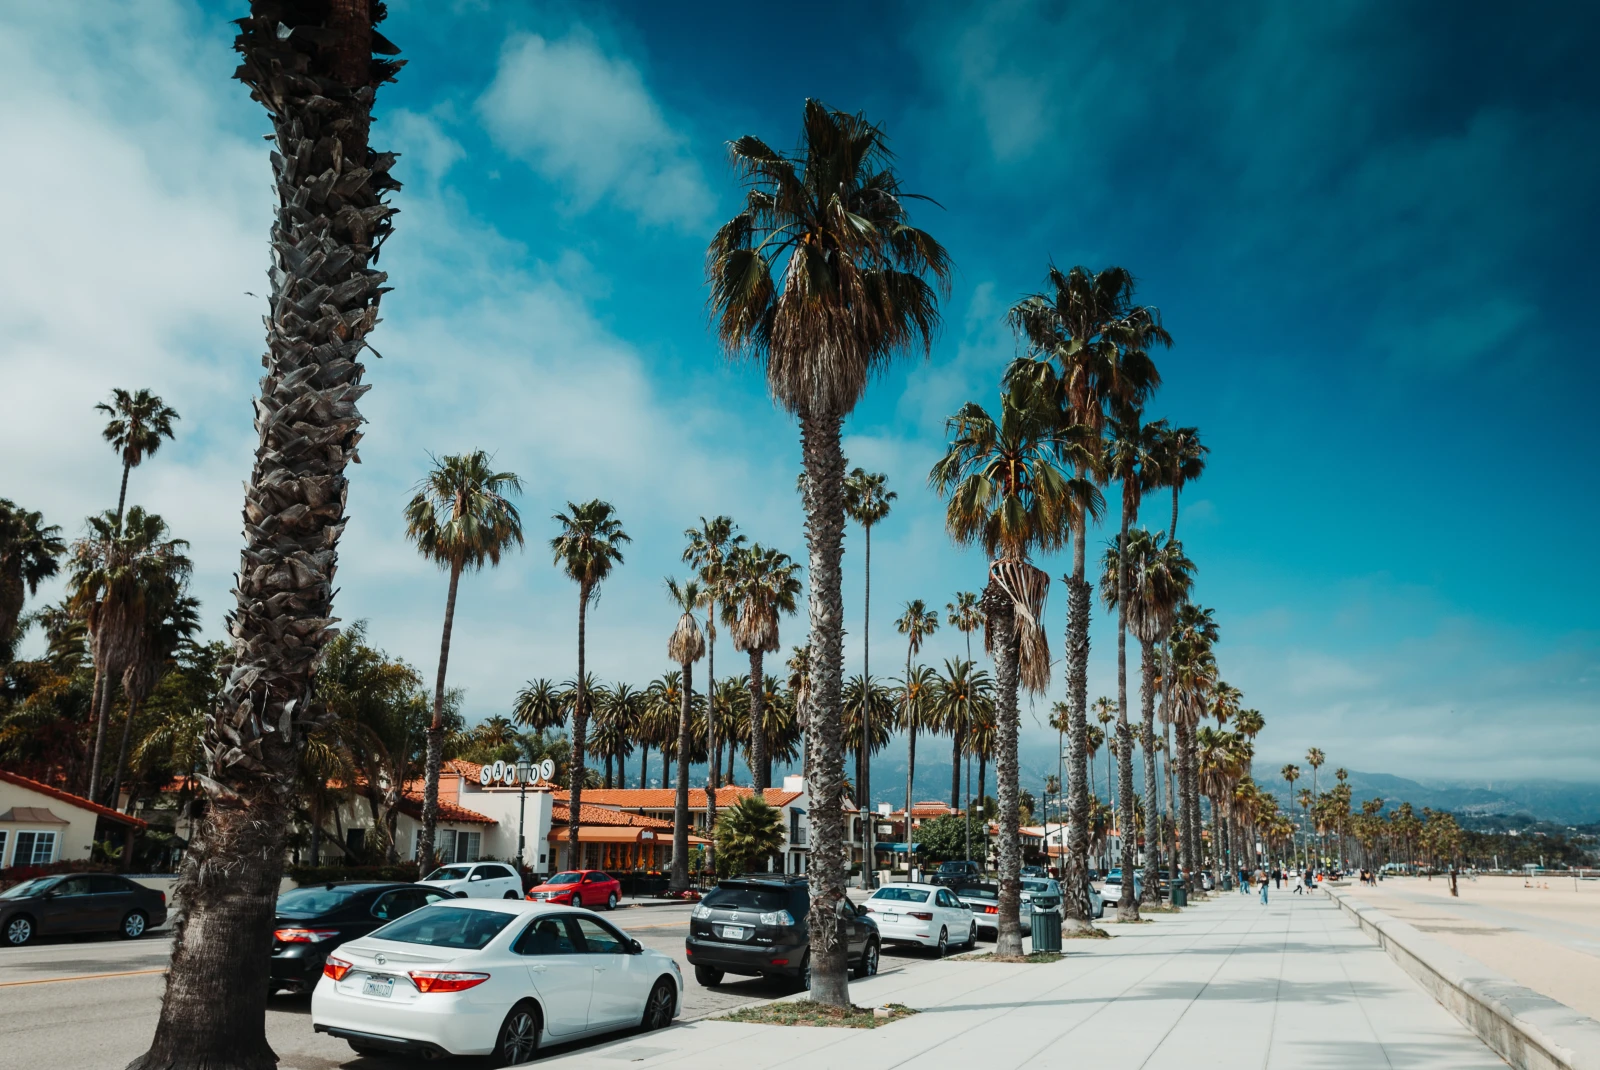 A street view with palm trees at the daytime.